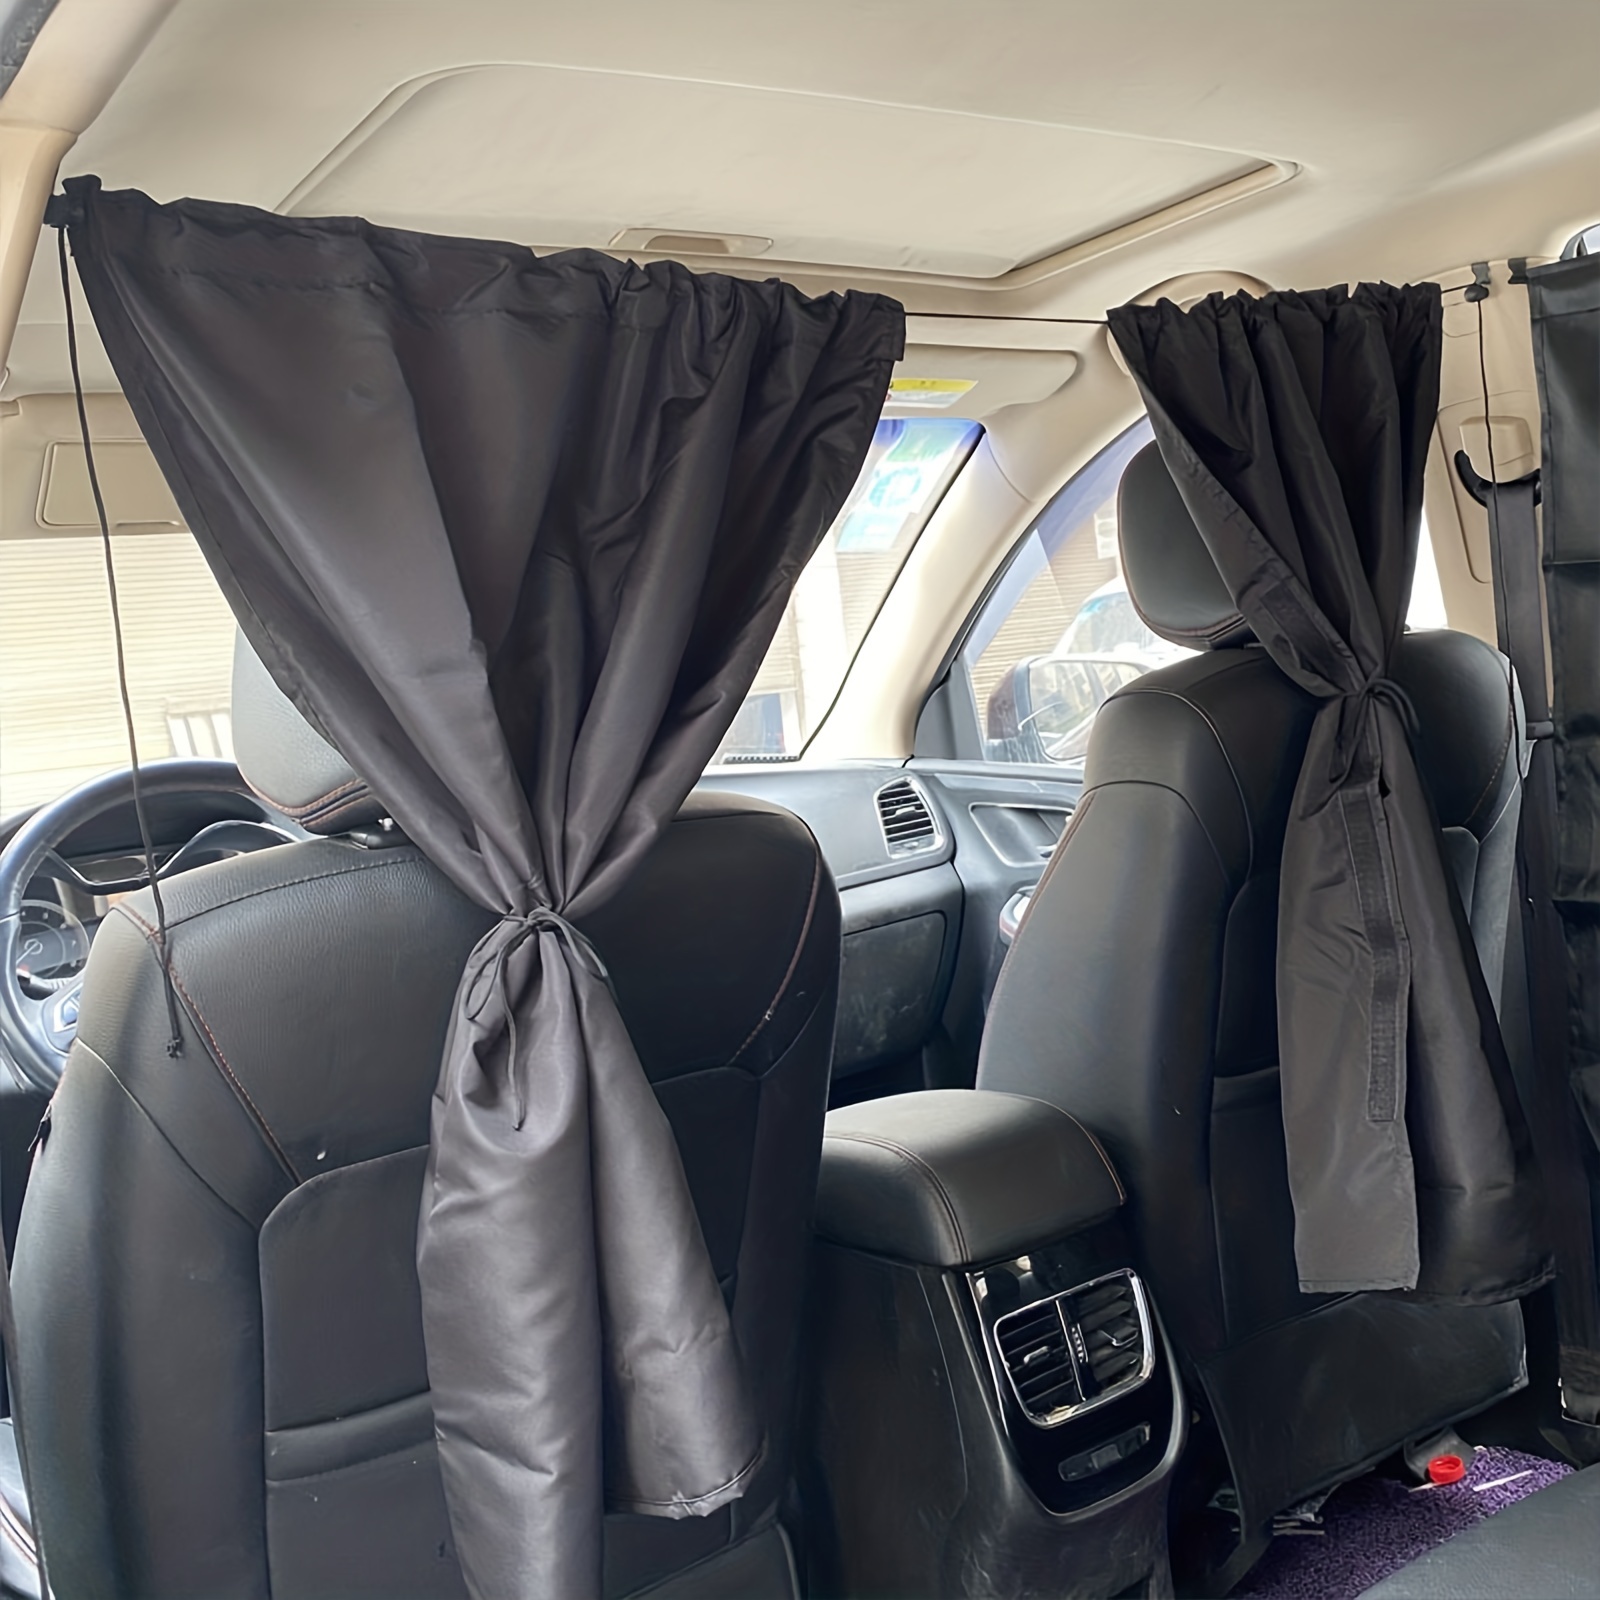 Protect Your Car from the Sun with These Stylish Blackout Window Shades!